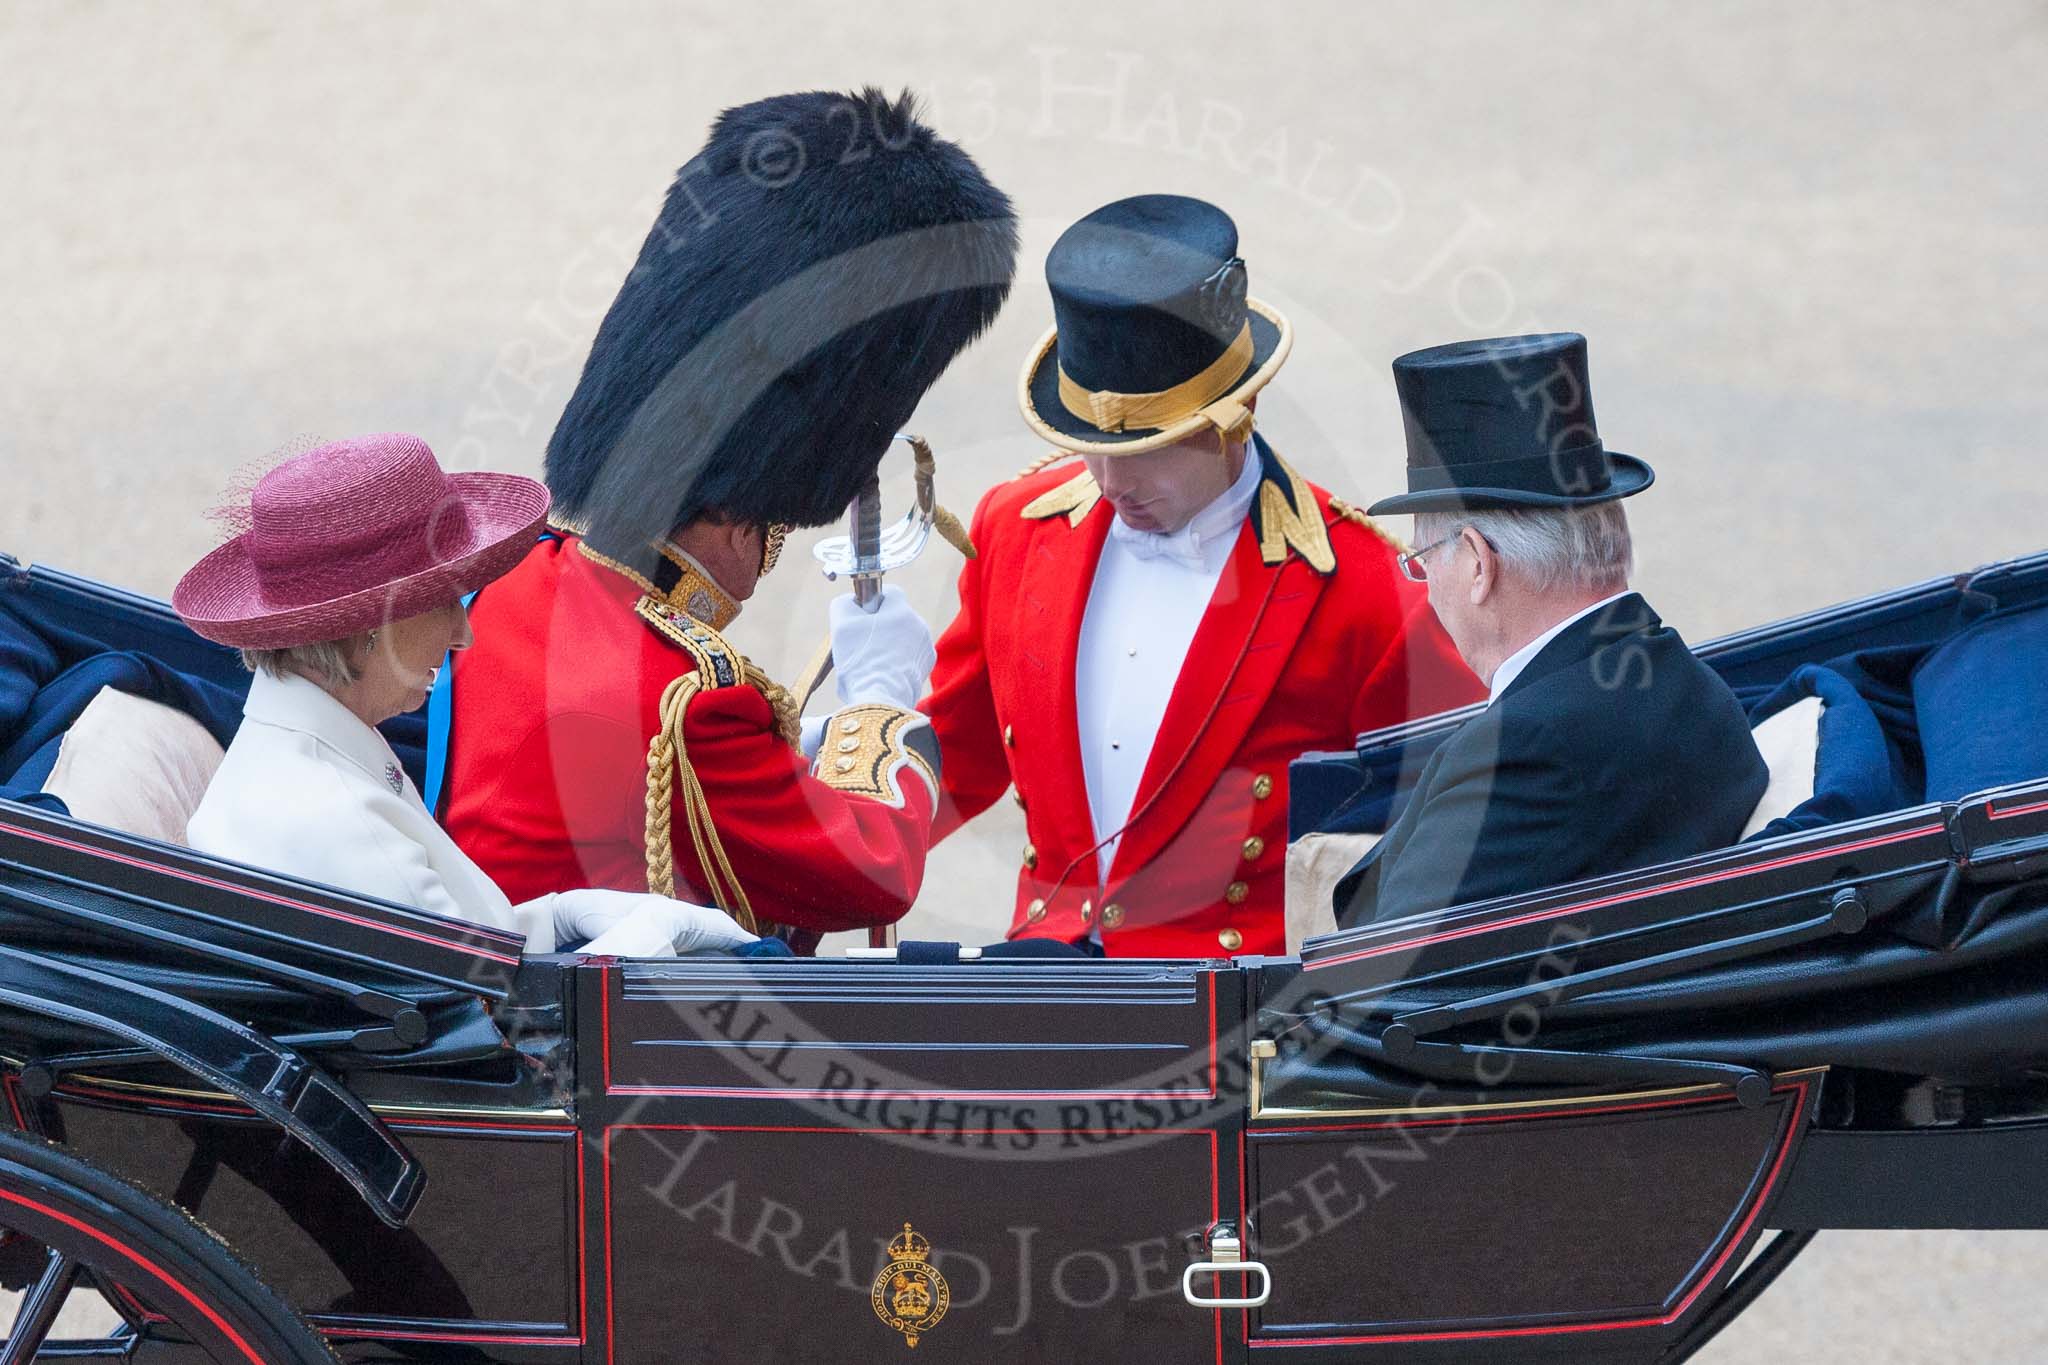 Trooping the Colour 2015. Image #197, 13 June 2015 10:52 Horse Guards Parade, London, UK